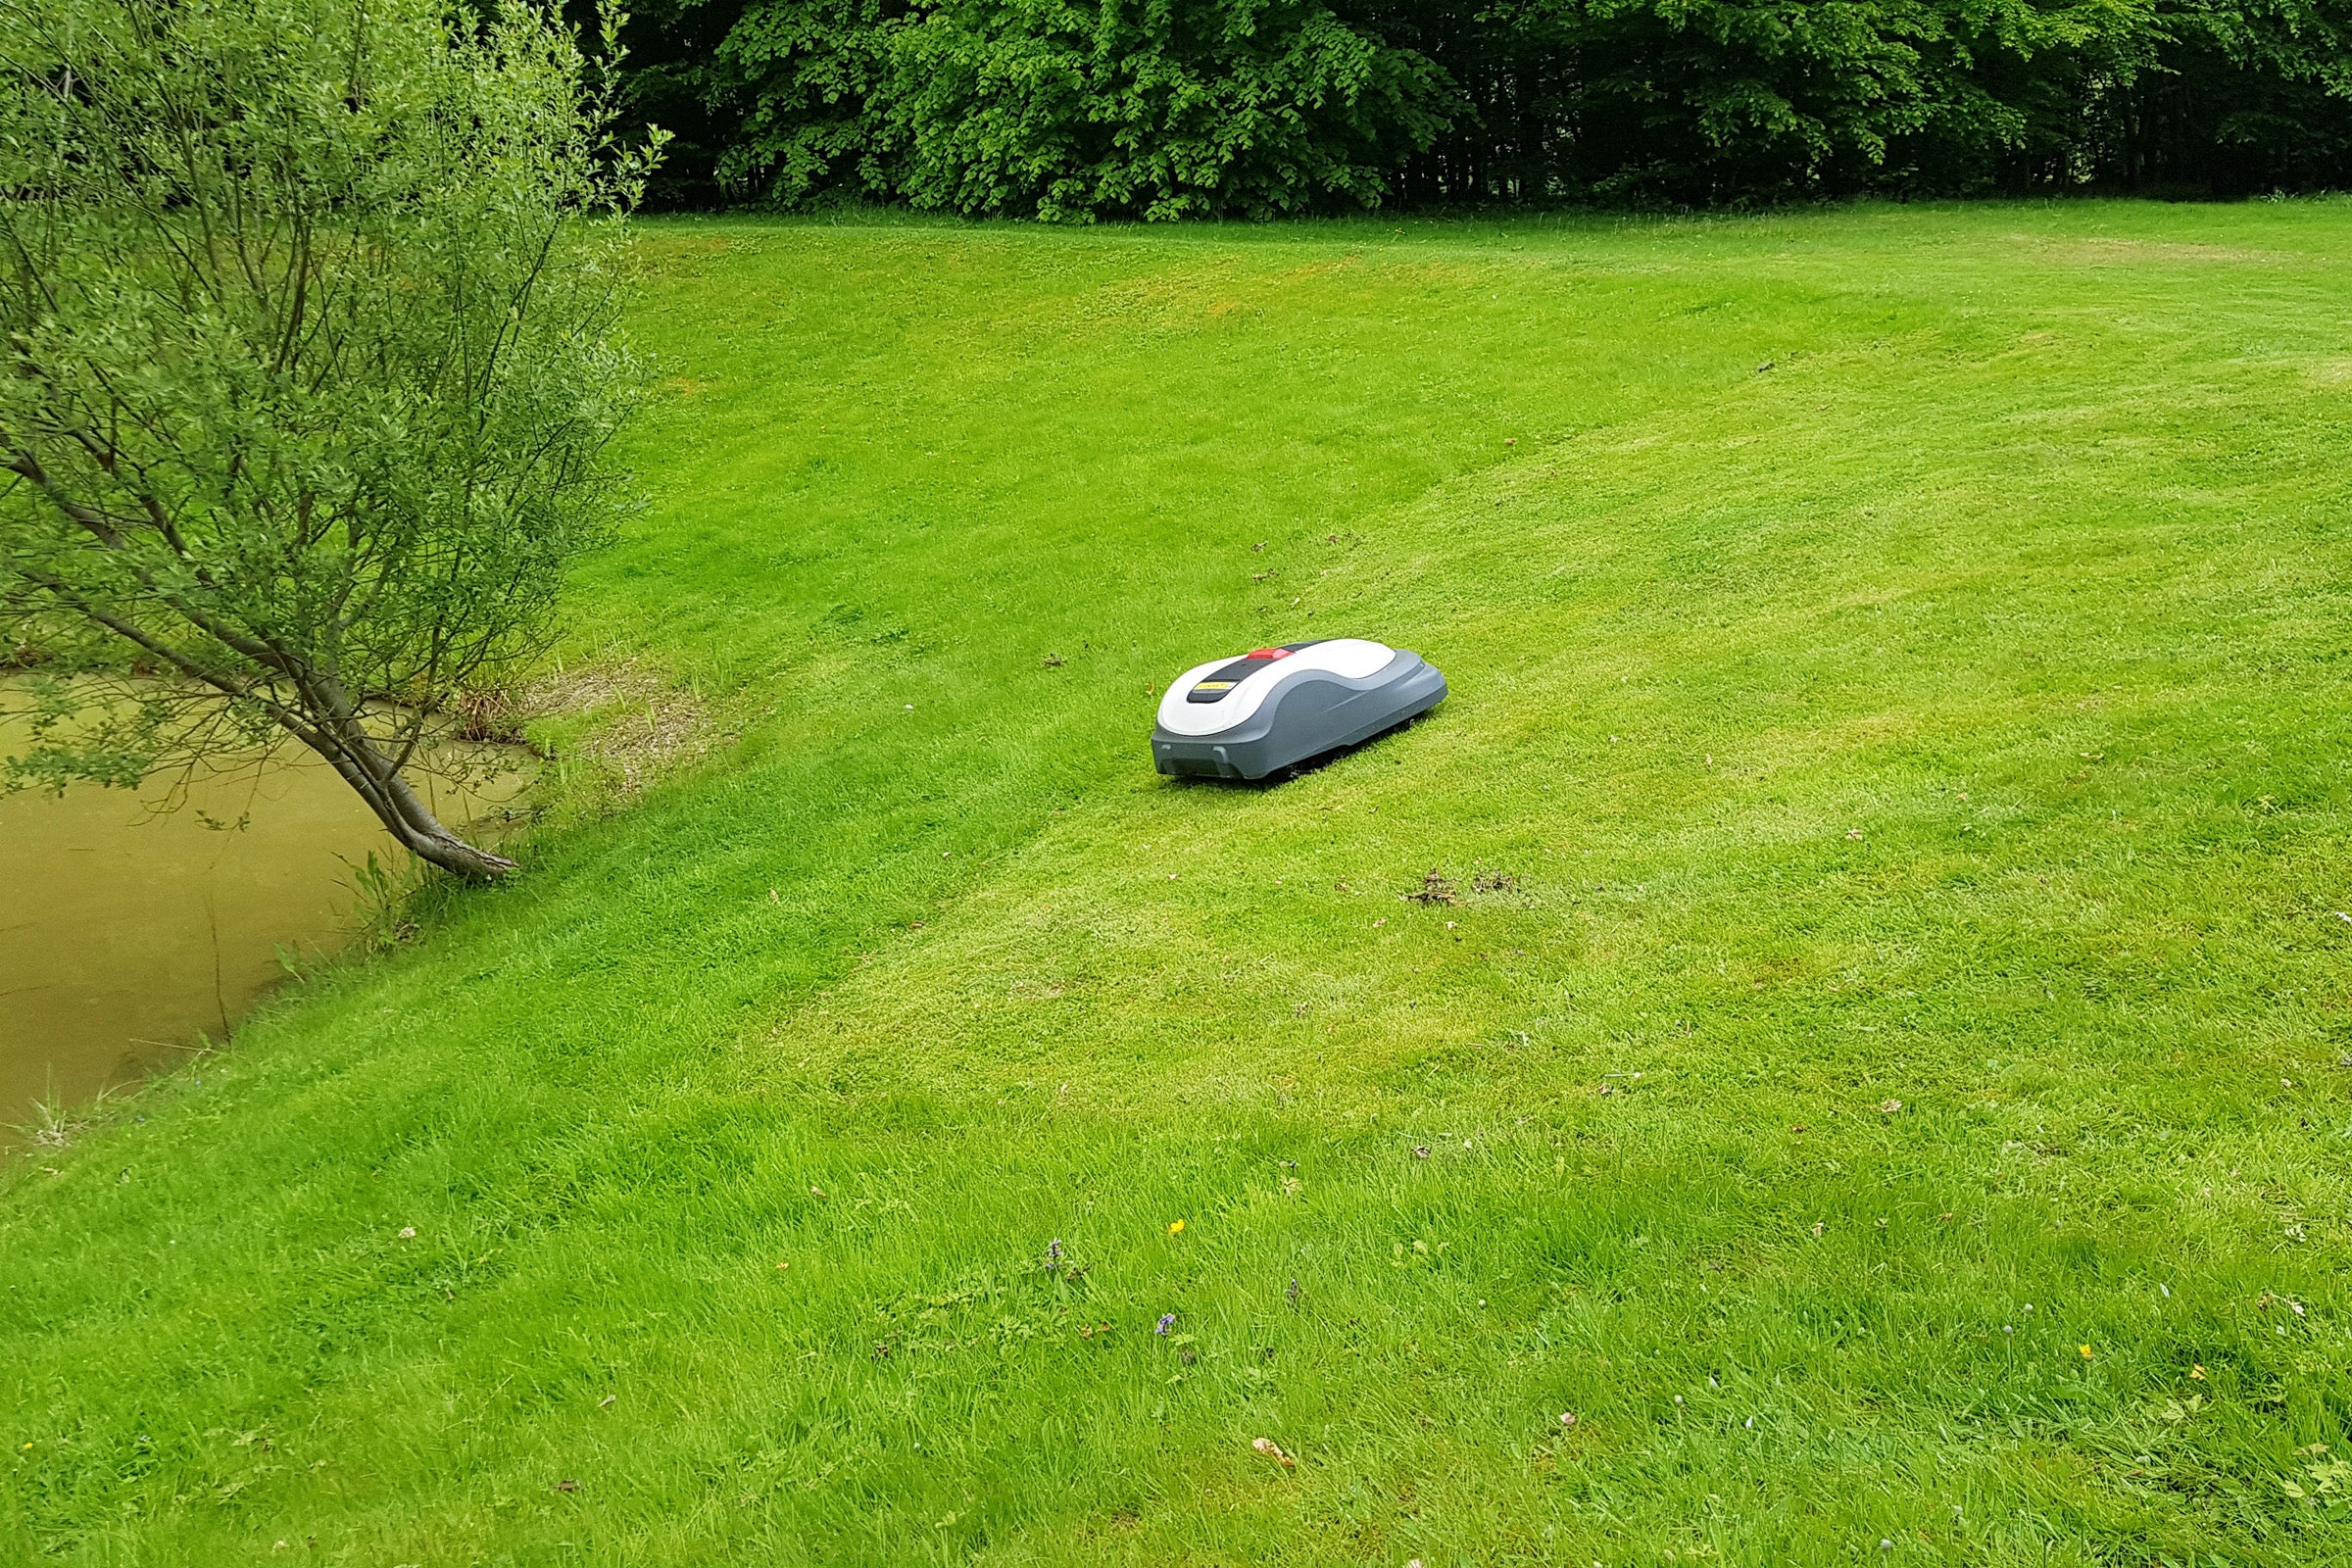 A gray-white Honda Miimo 3000 robot lawnmower working in lawn over slope